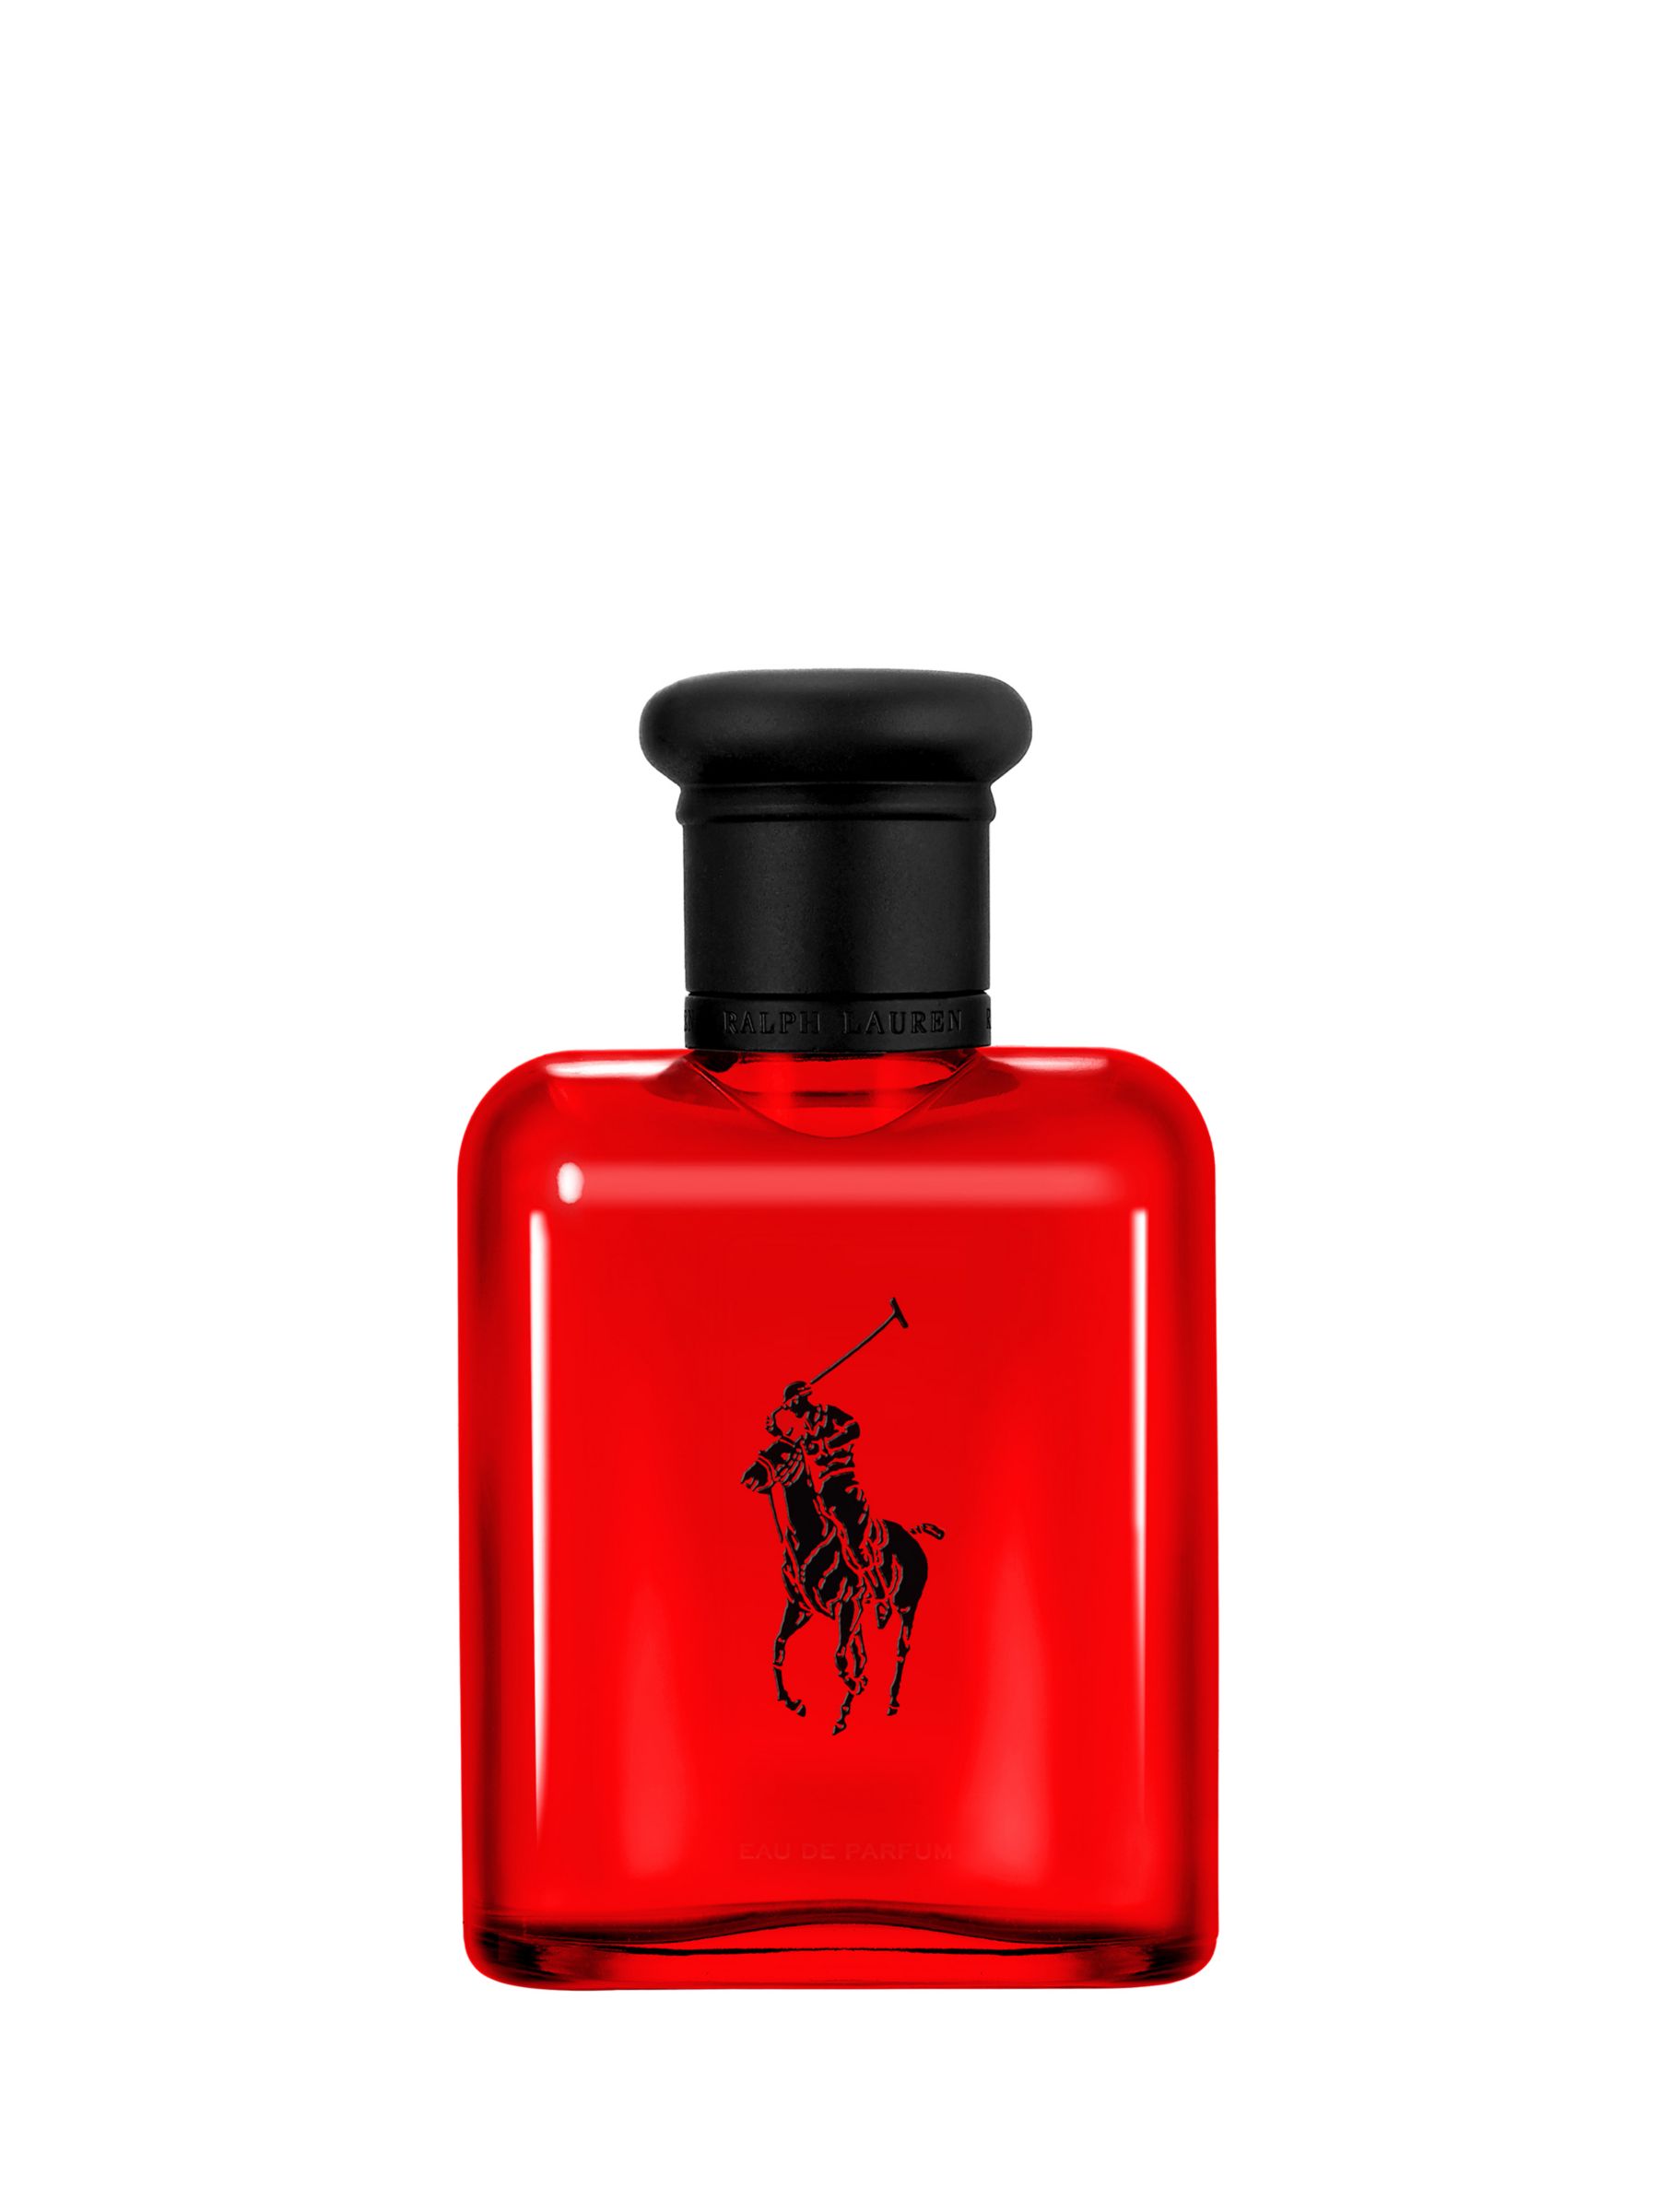 polo aftershave